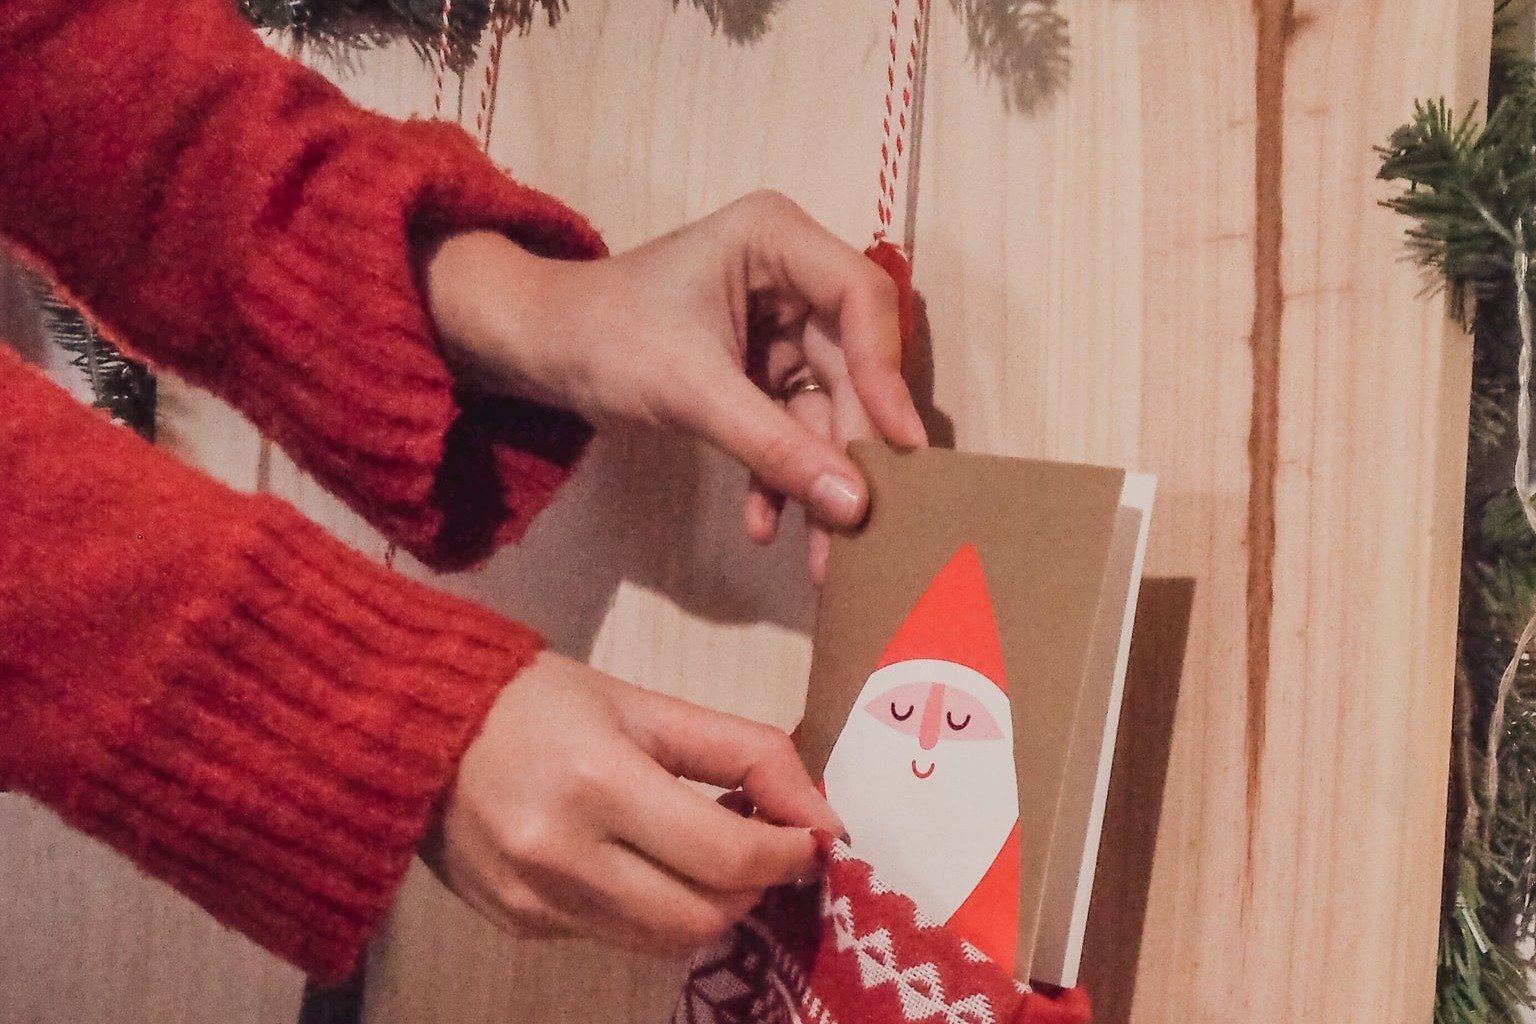 Emily grabbed the letter from the stocking and went to the kitchen. | Source: Unsplash